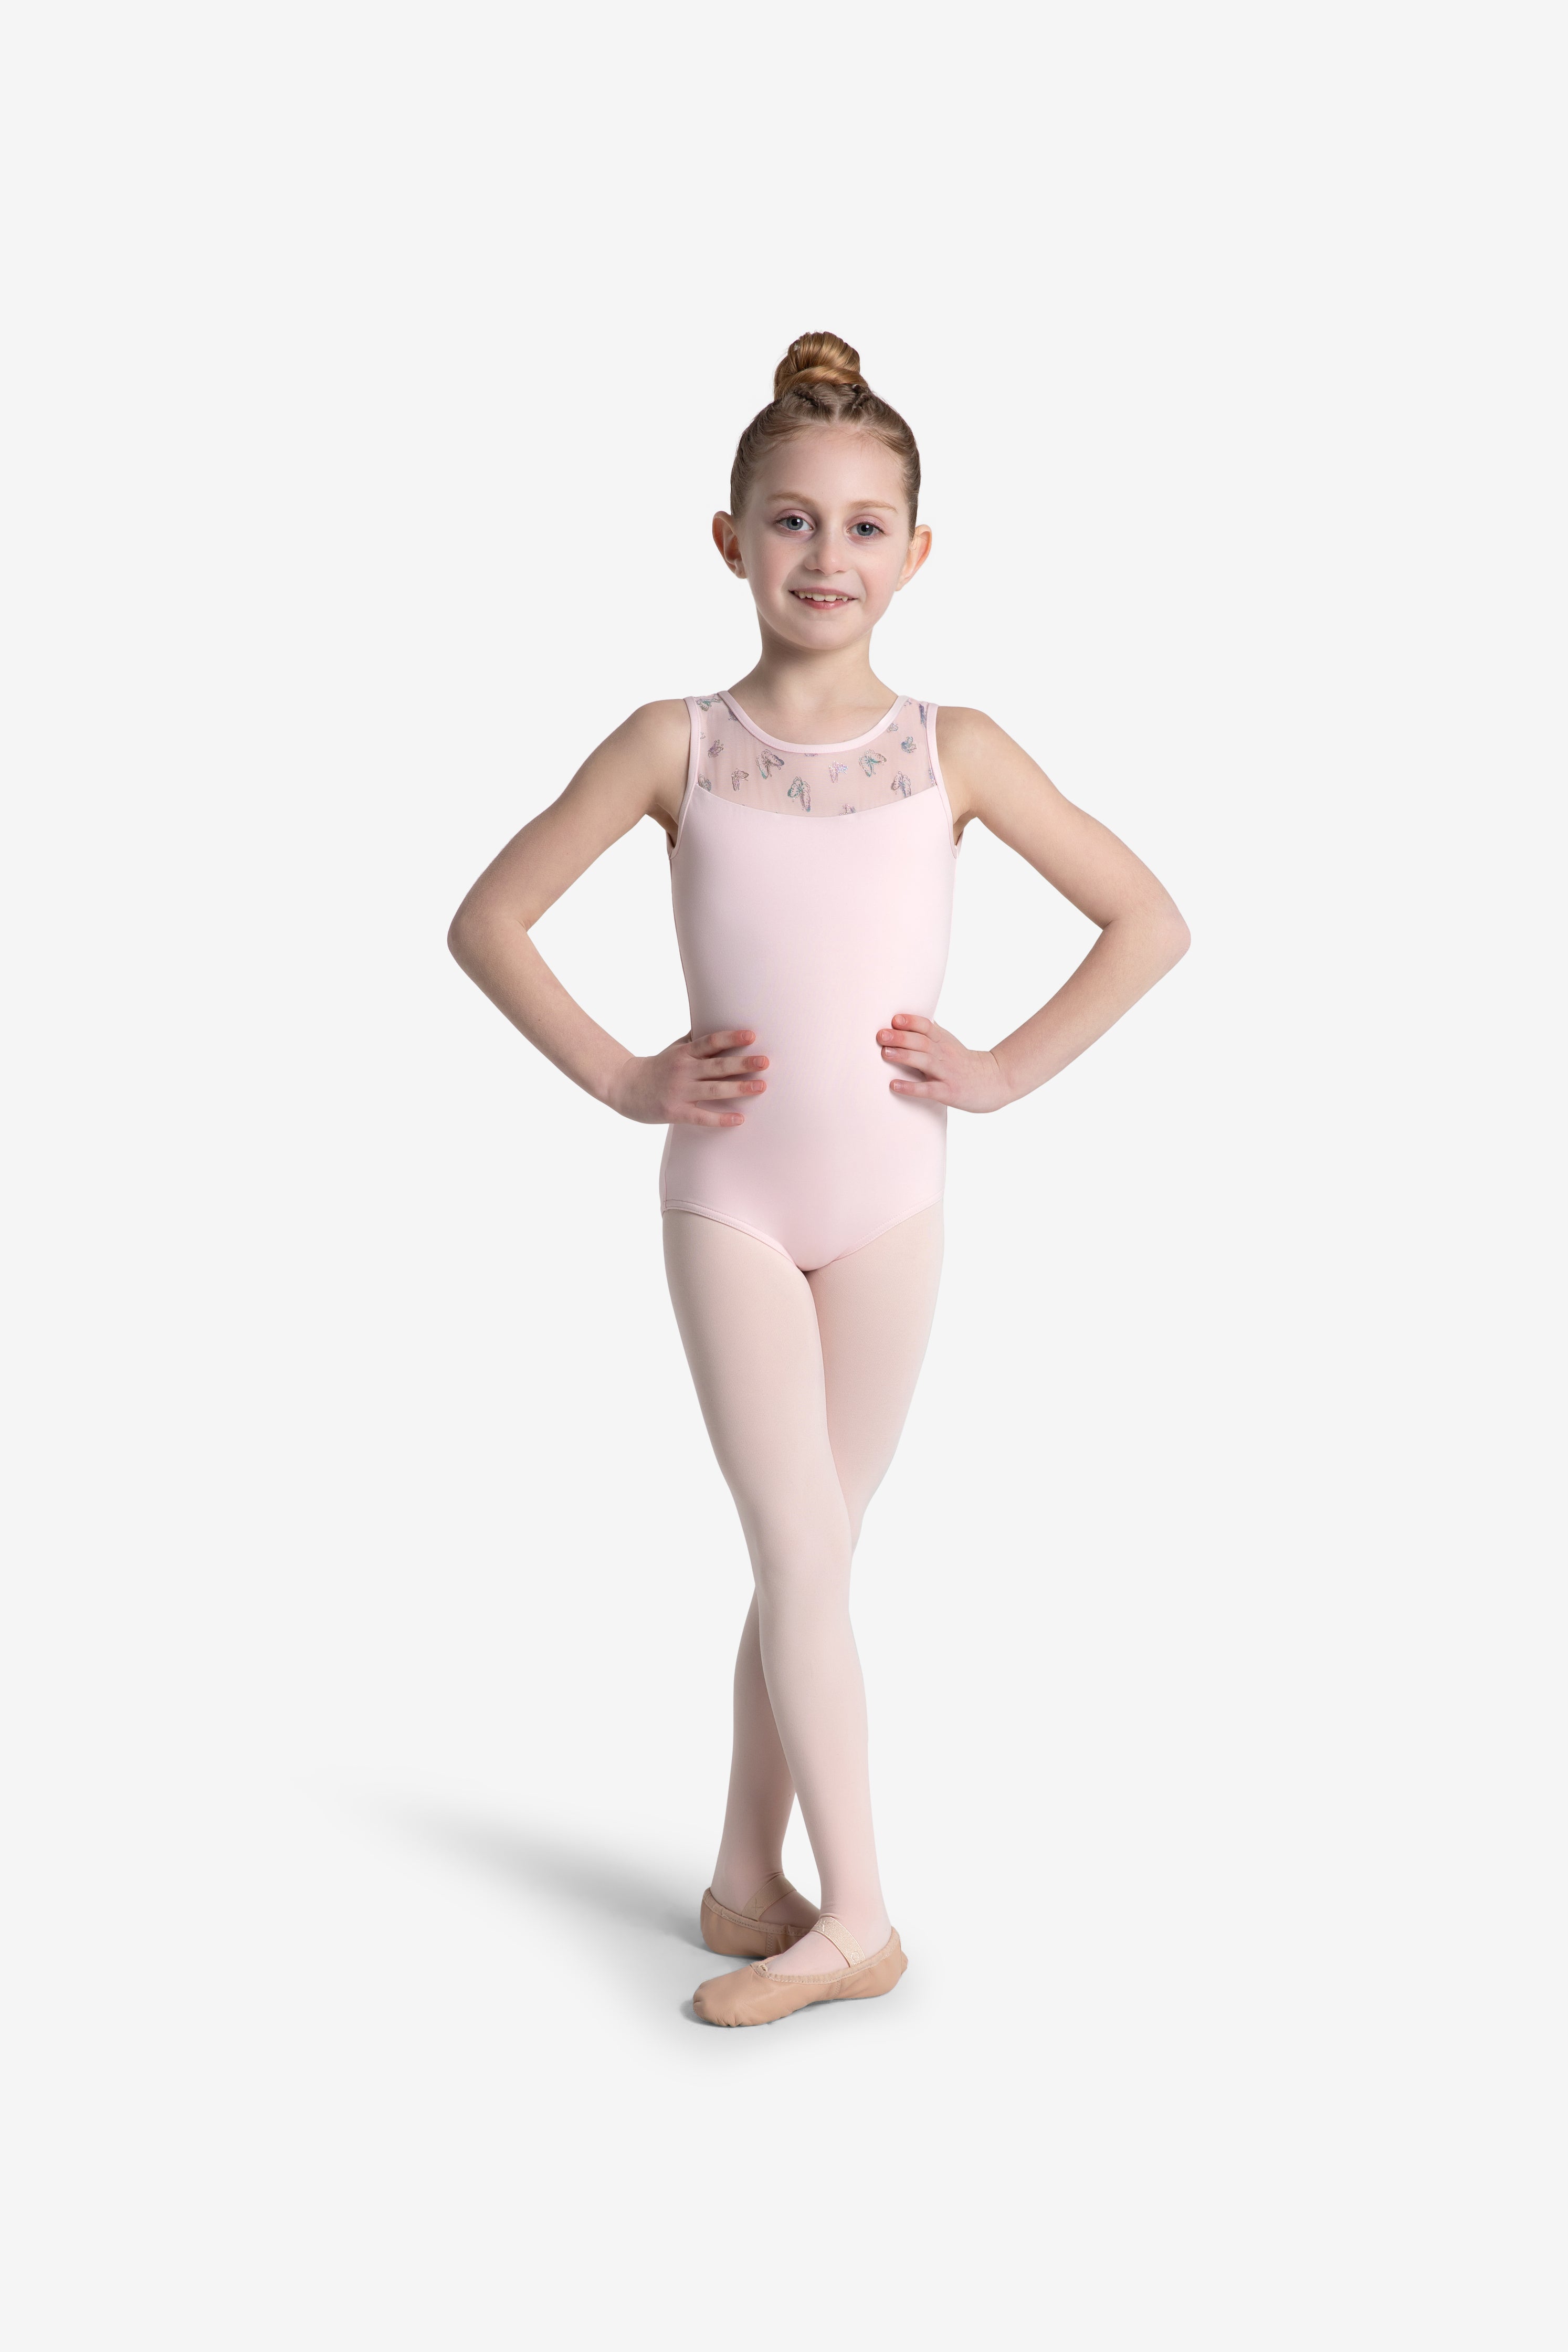  easyforever Girls Camisole Ballet Dance Floral Lace Leotard  Gymnastics Backless Dance Unitard Bodysuit Dancewear Pink 7-8 Years :  Clothing, Shoes & Jewelry